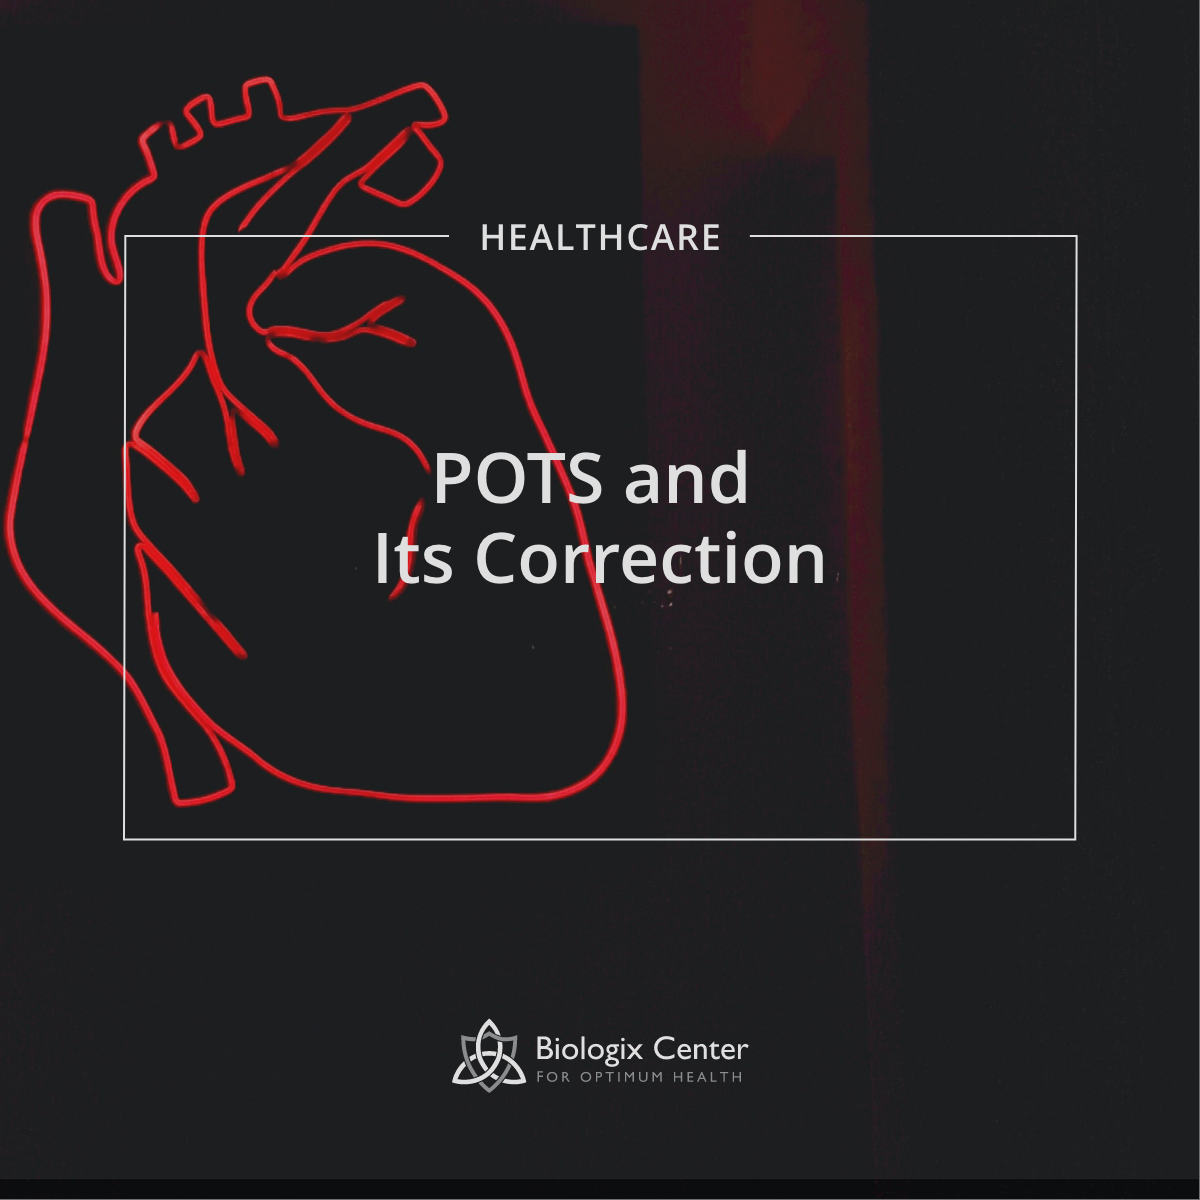 POTS and Its Correction - Biologix Center for Optimum Health